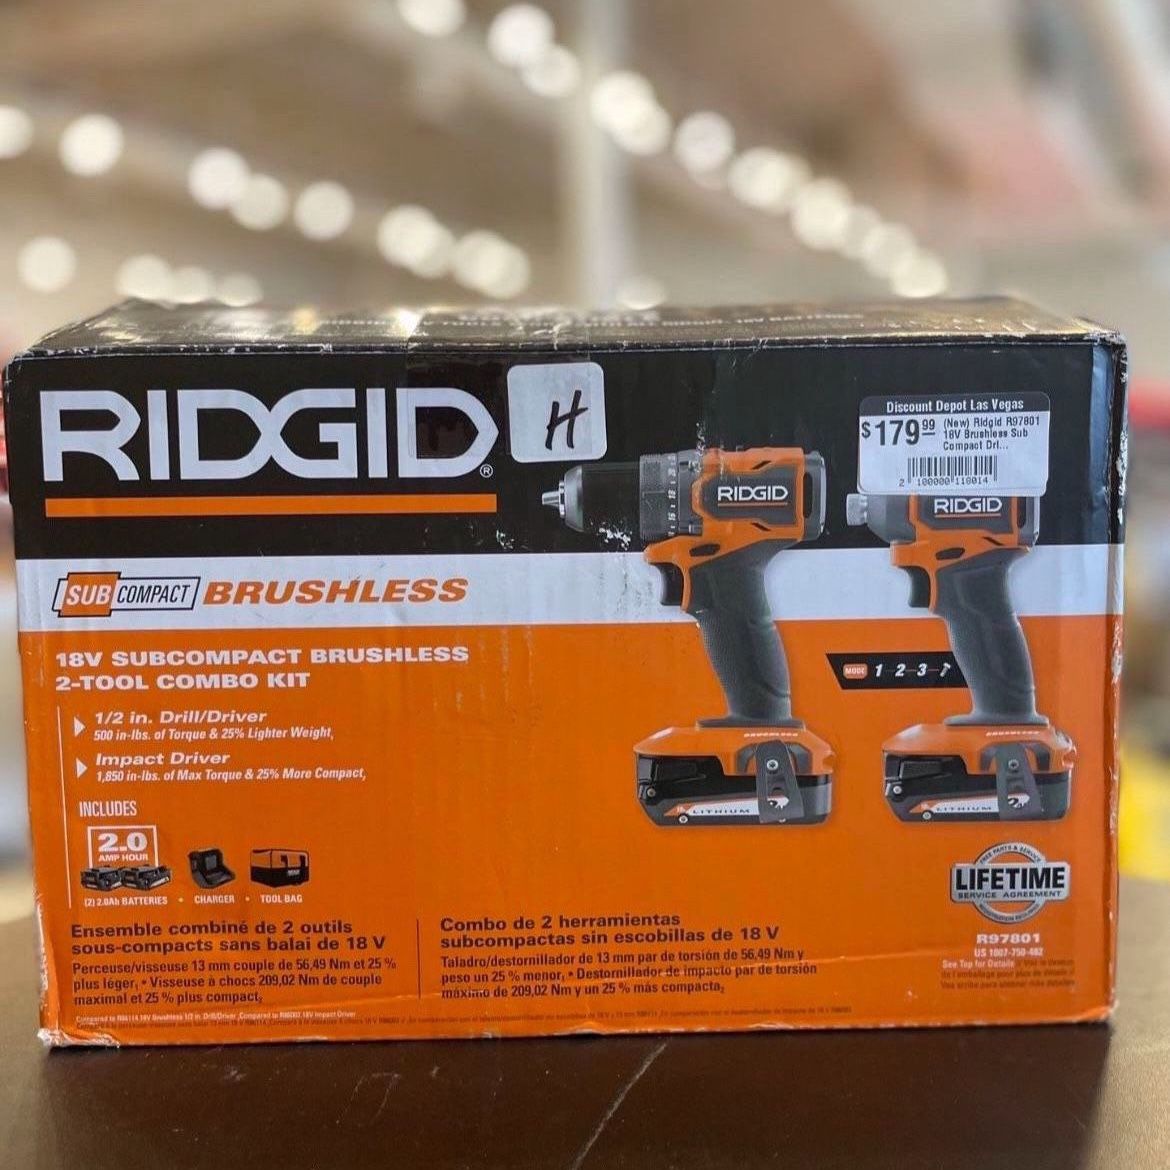 RIDGID 18V SubCompact Brushless 2-Tool Combo Kit with Drill/Driver, Impact Driver, (2) 2.0 Ah Batteries, Charger R97801